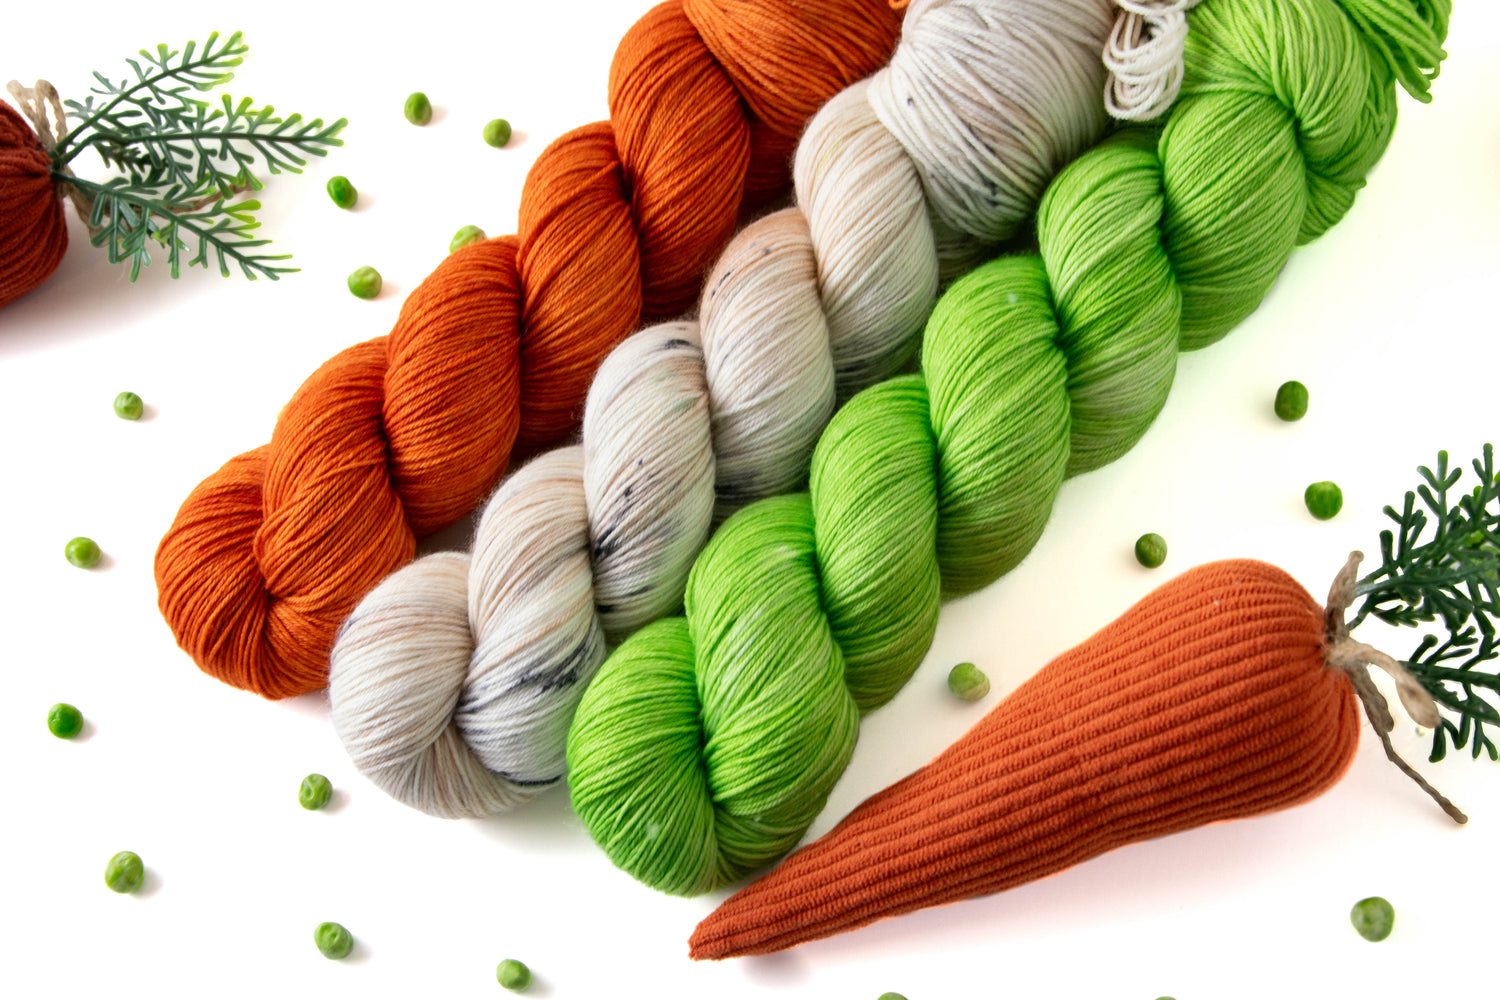 Three skeins of yarn on a white background surrounded by peas and stuffed decorative carrots. The skeins are orange, white with sections of tan and speckled in black, and bright green.